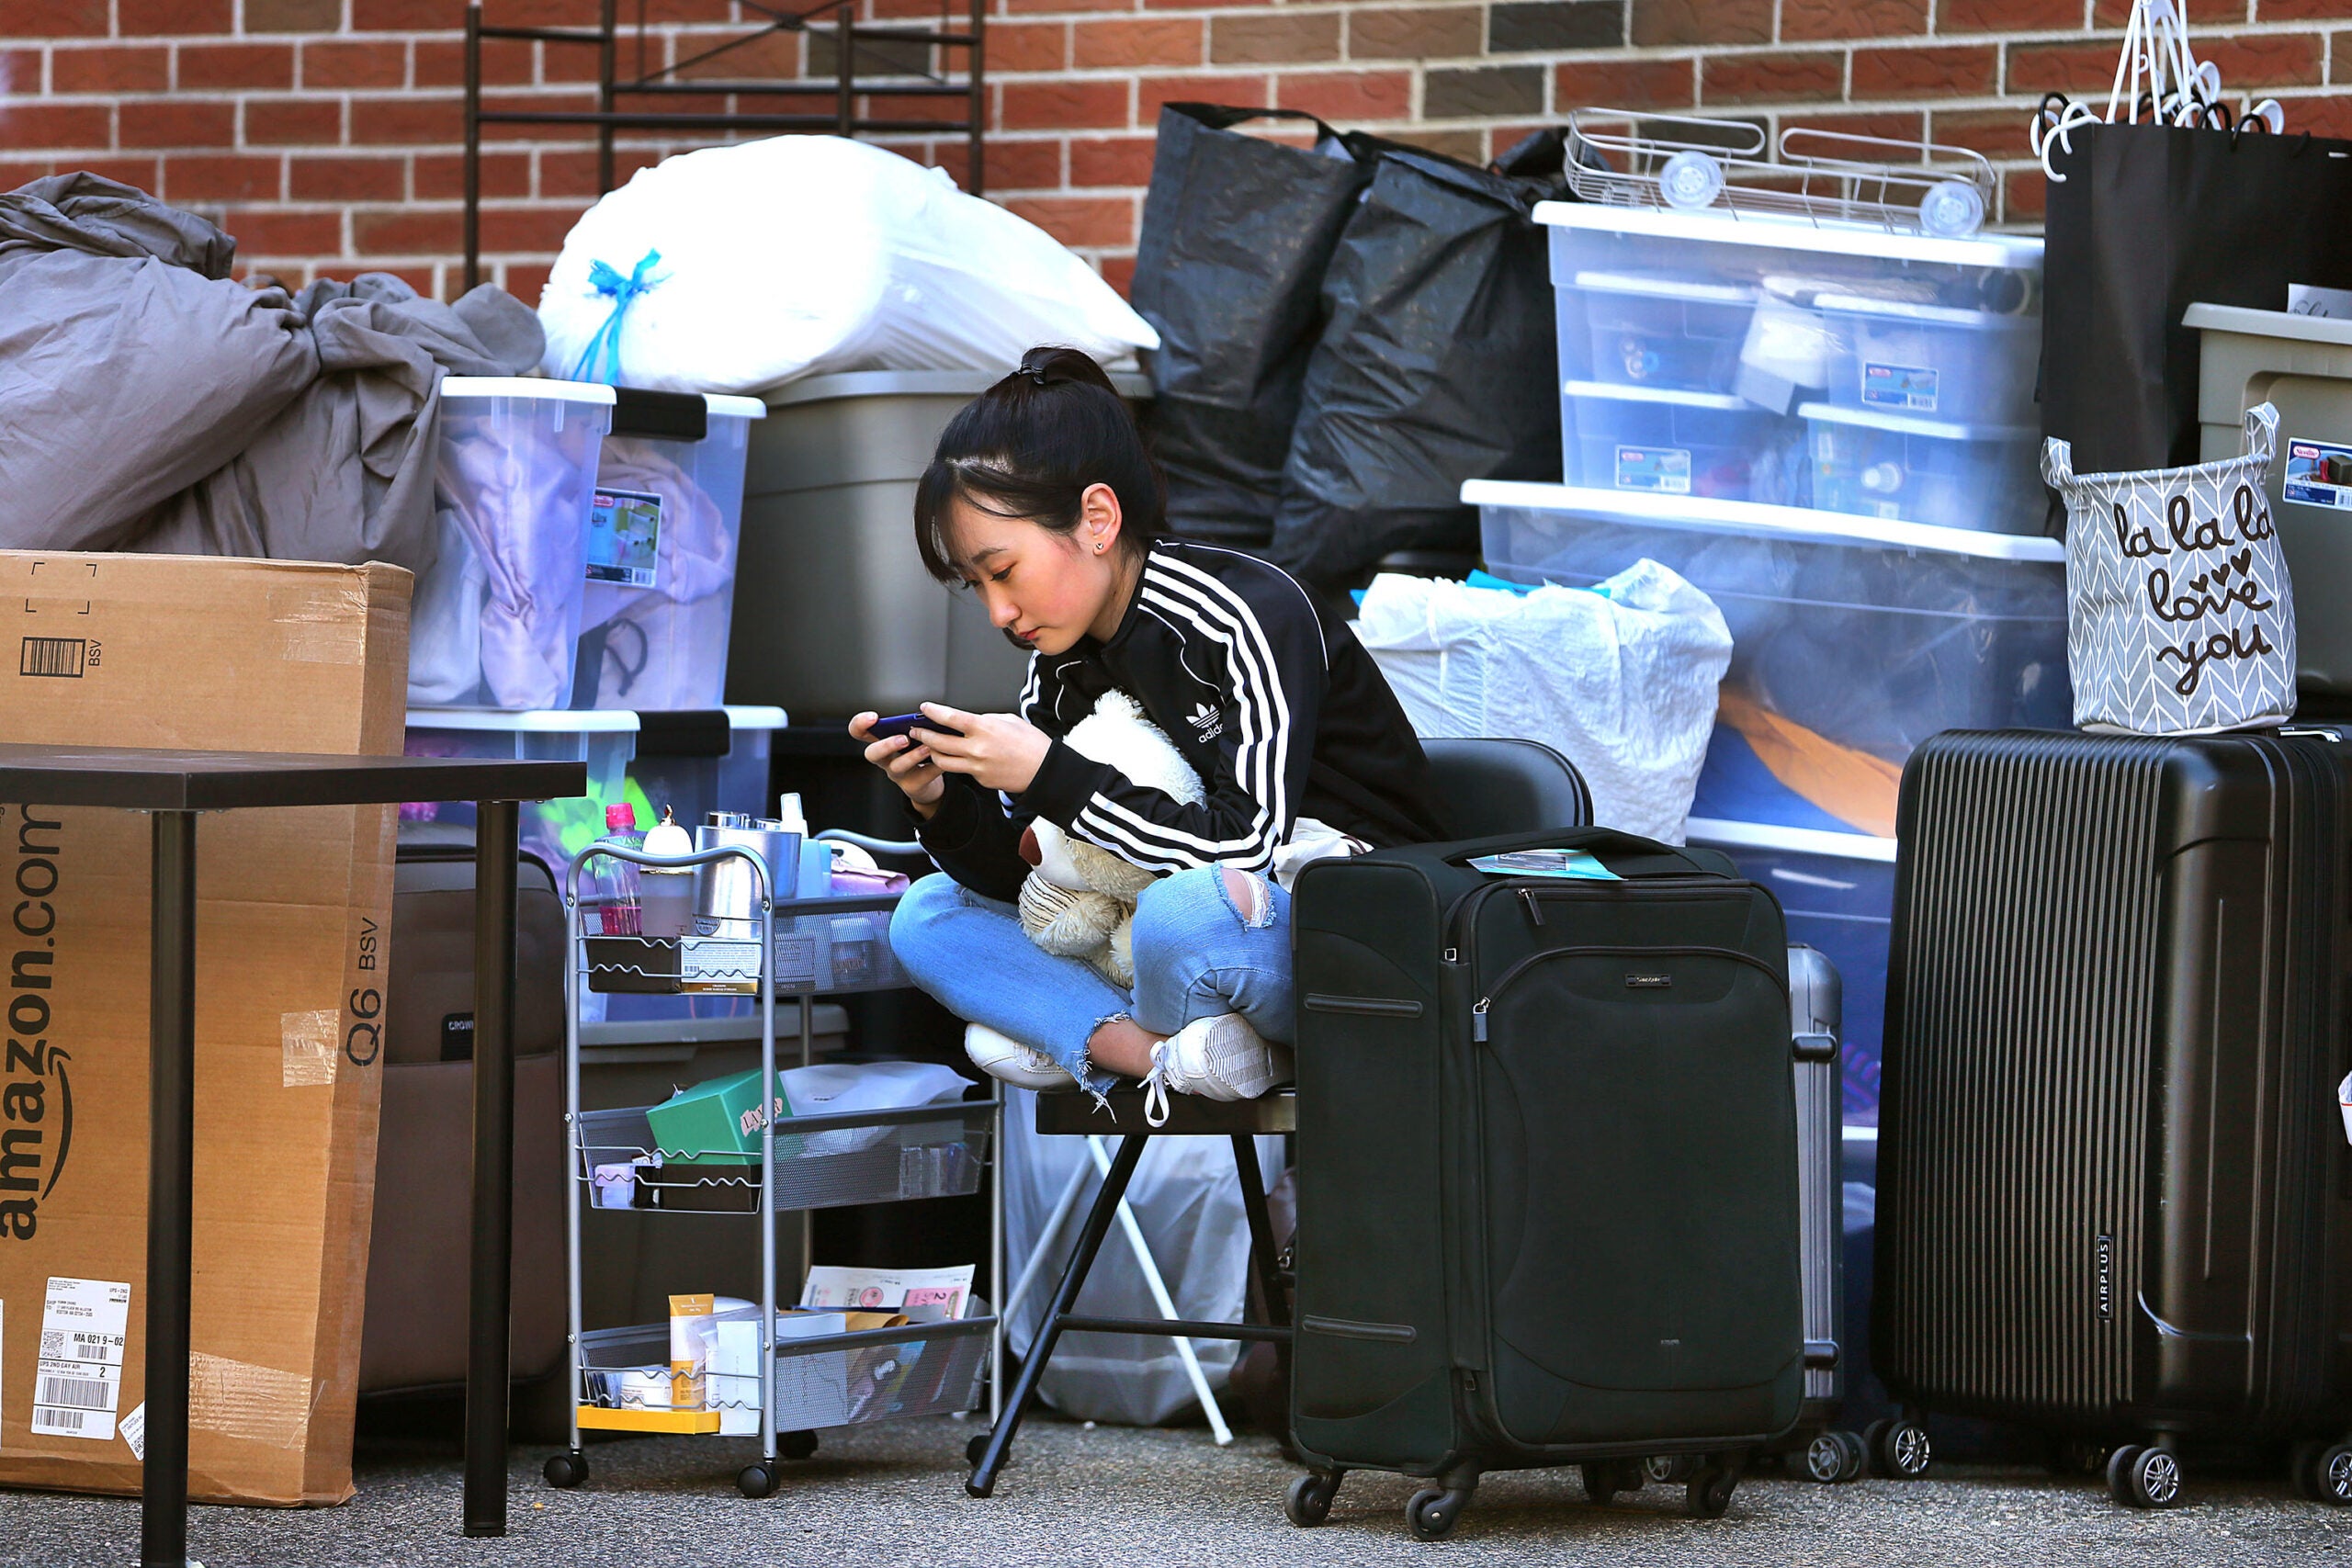 Boston University senior Yifei Ren sits amidst a pile of belongings of her friends and hers as she waited three hours on Saturday, Sept. 1, 2018 to get inside their apartment on Linden Street in Allston.